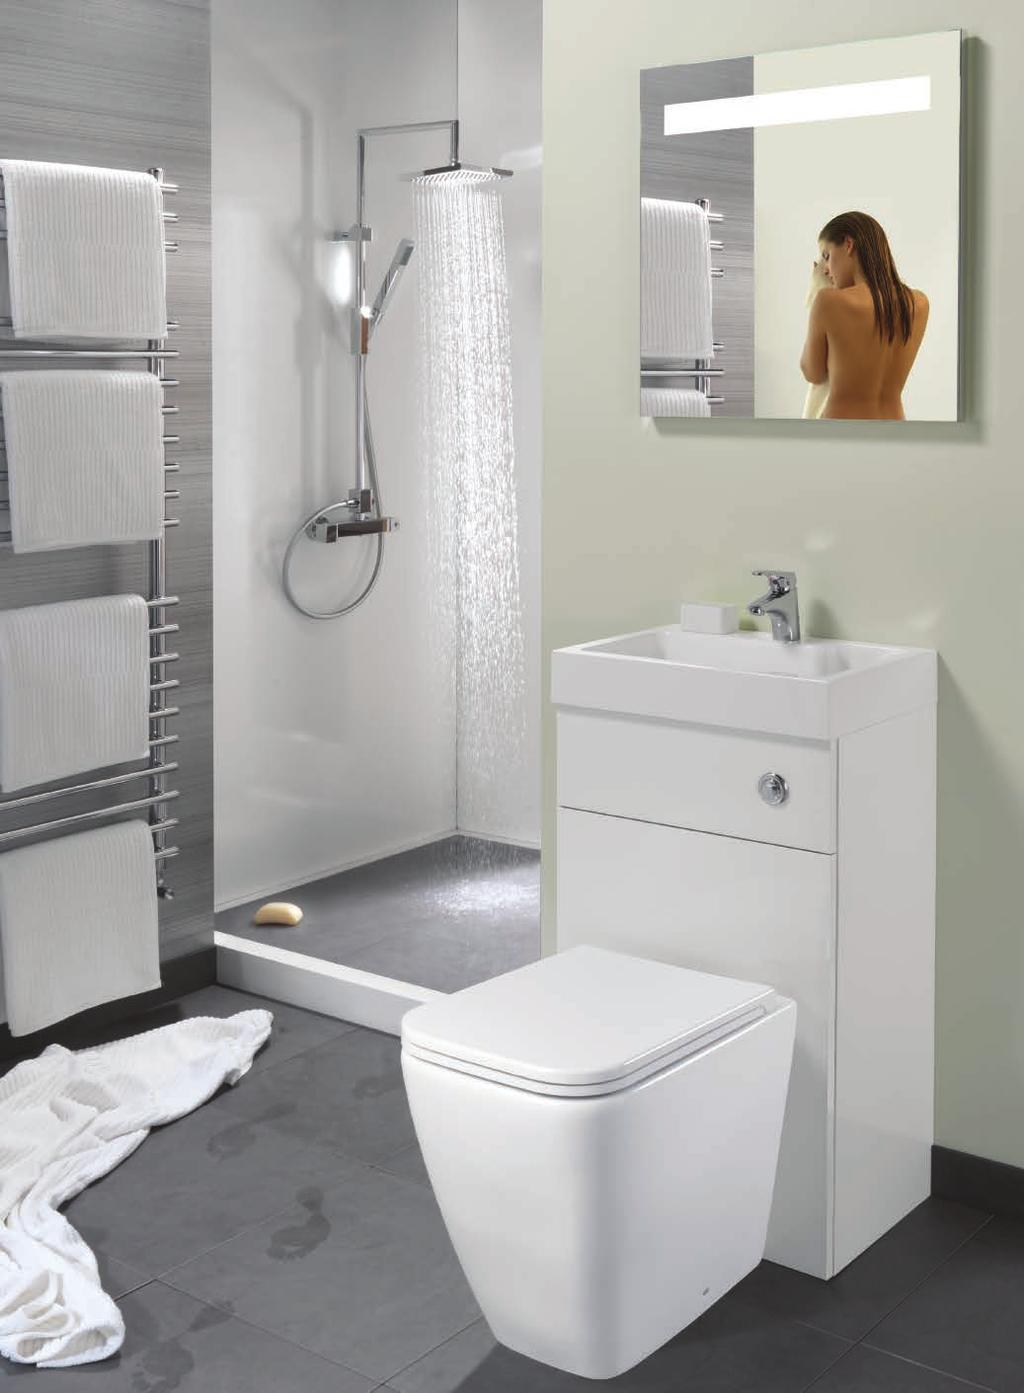 The internal dimensions of the WC Cabinet allow for cistern fittings and a macerator such as